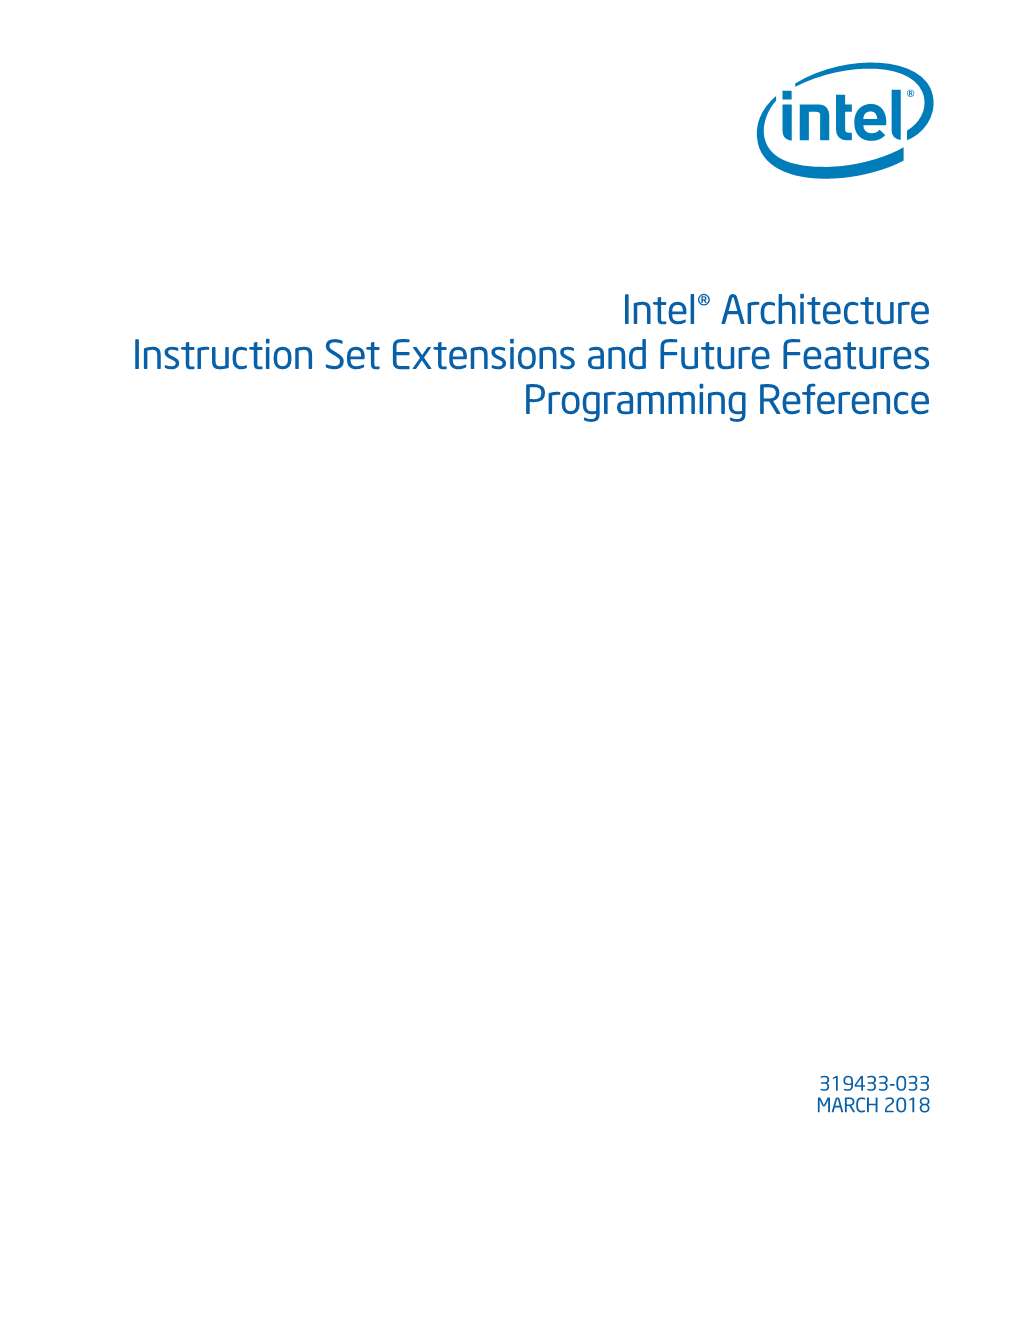 Intel® Architecture Instruction Set Extensions and Future Features Programming Reference